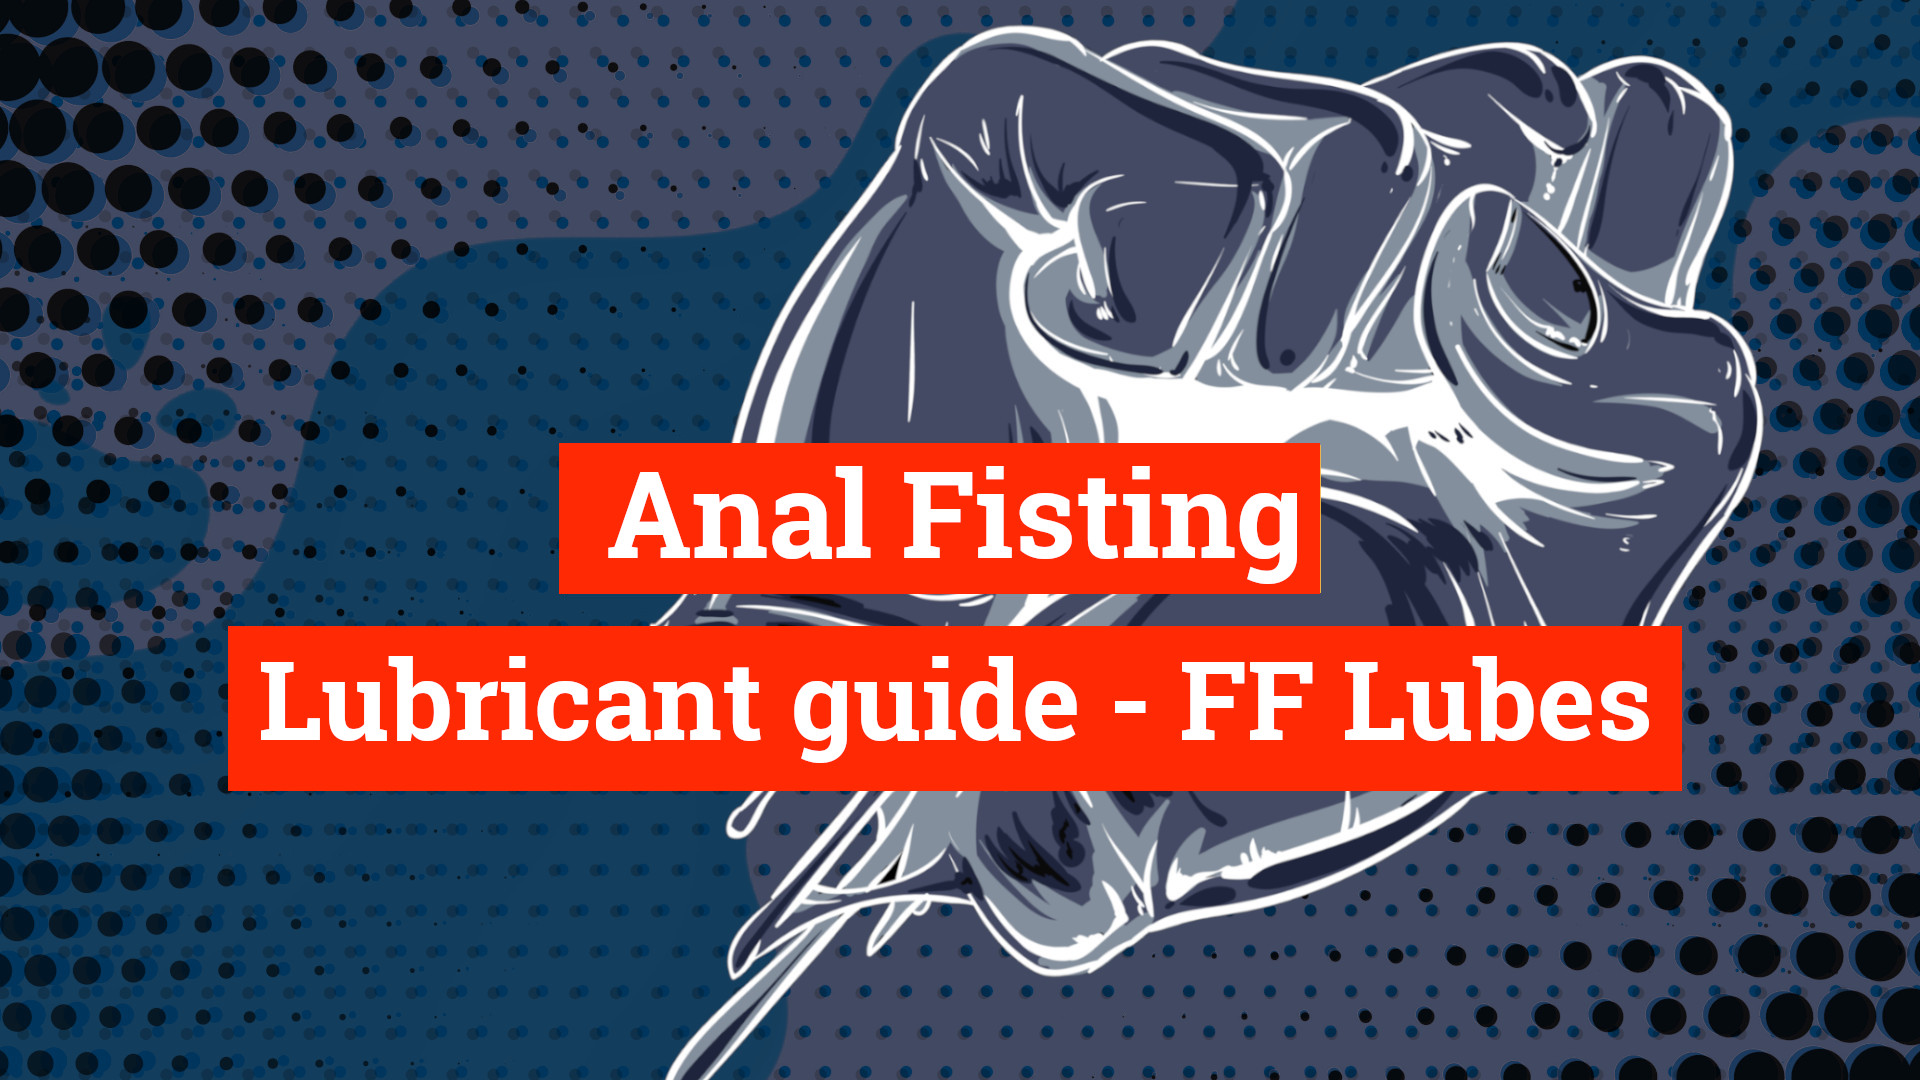 http://fistfy.com/wp-content/uploads/2021/02/anal-fisting-lubricant-guide-FF-Lubes.jpg